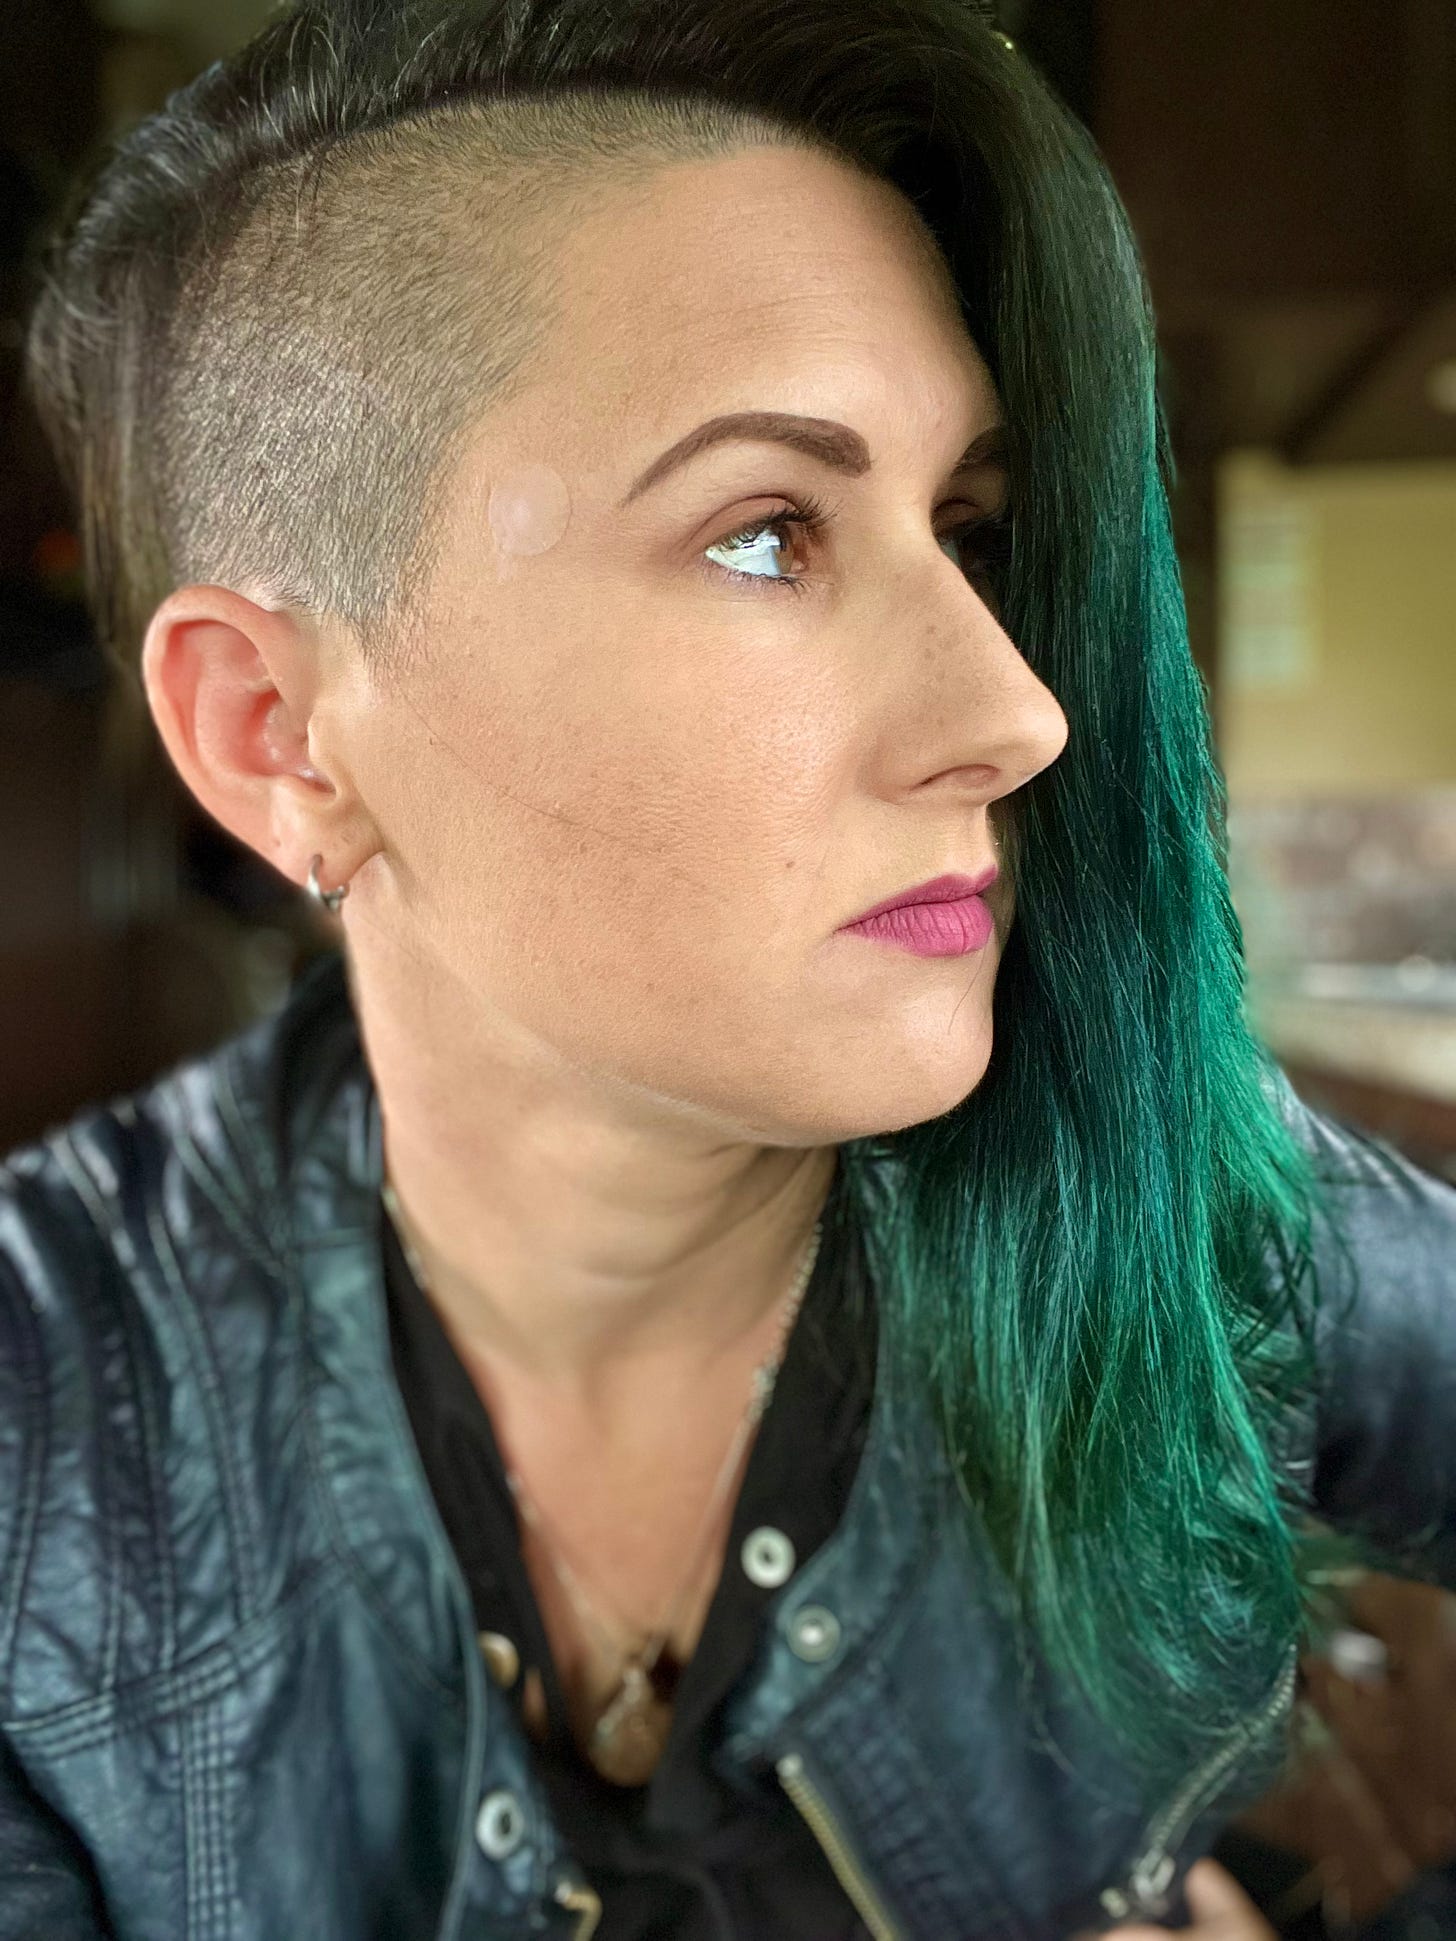 This is a photo of Lyric, with medium-length black hair with green ends and shaved sides, holding back tears. They are wearing a black leather jacket and can be seen inside their RV with the background blurred. 